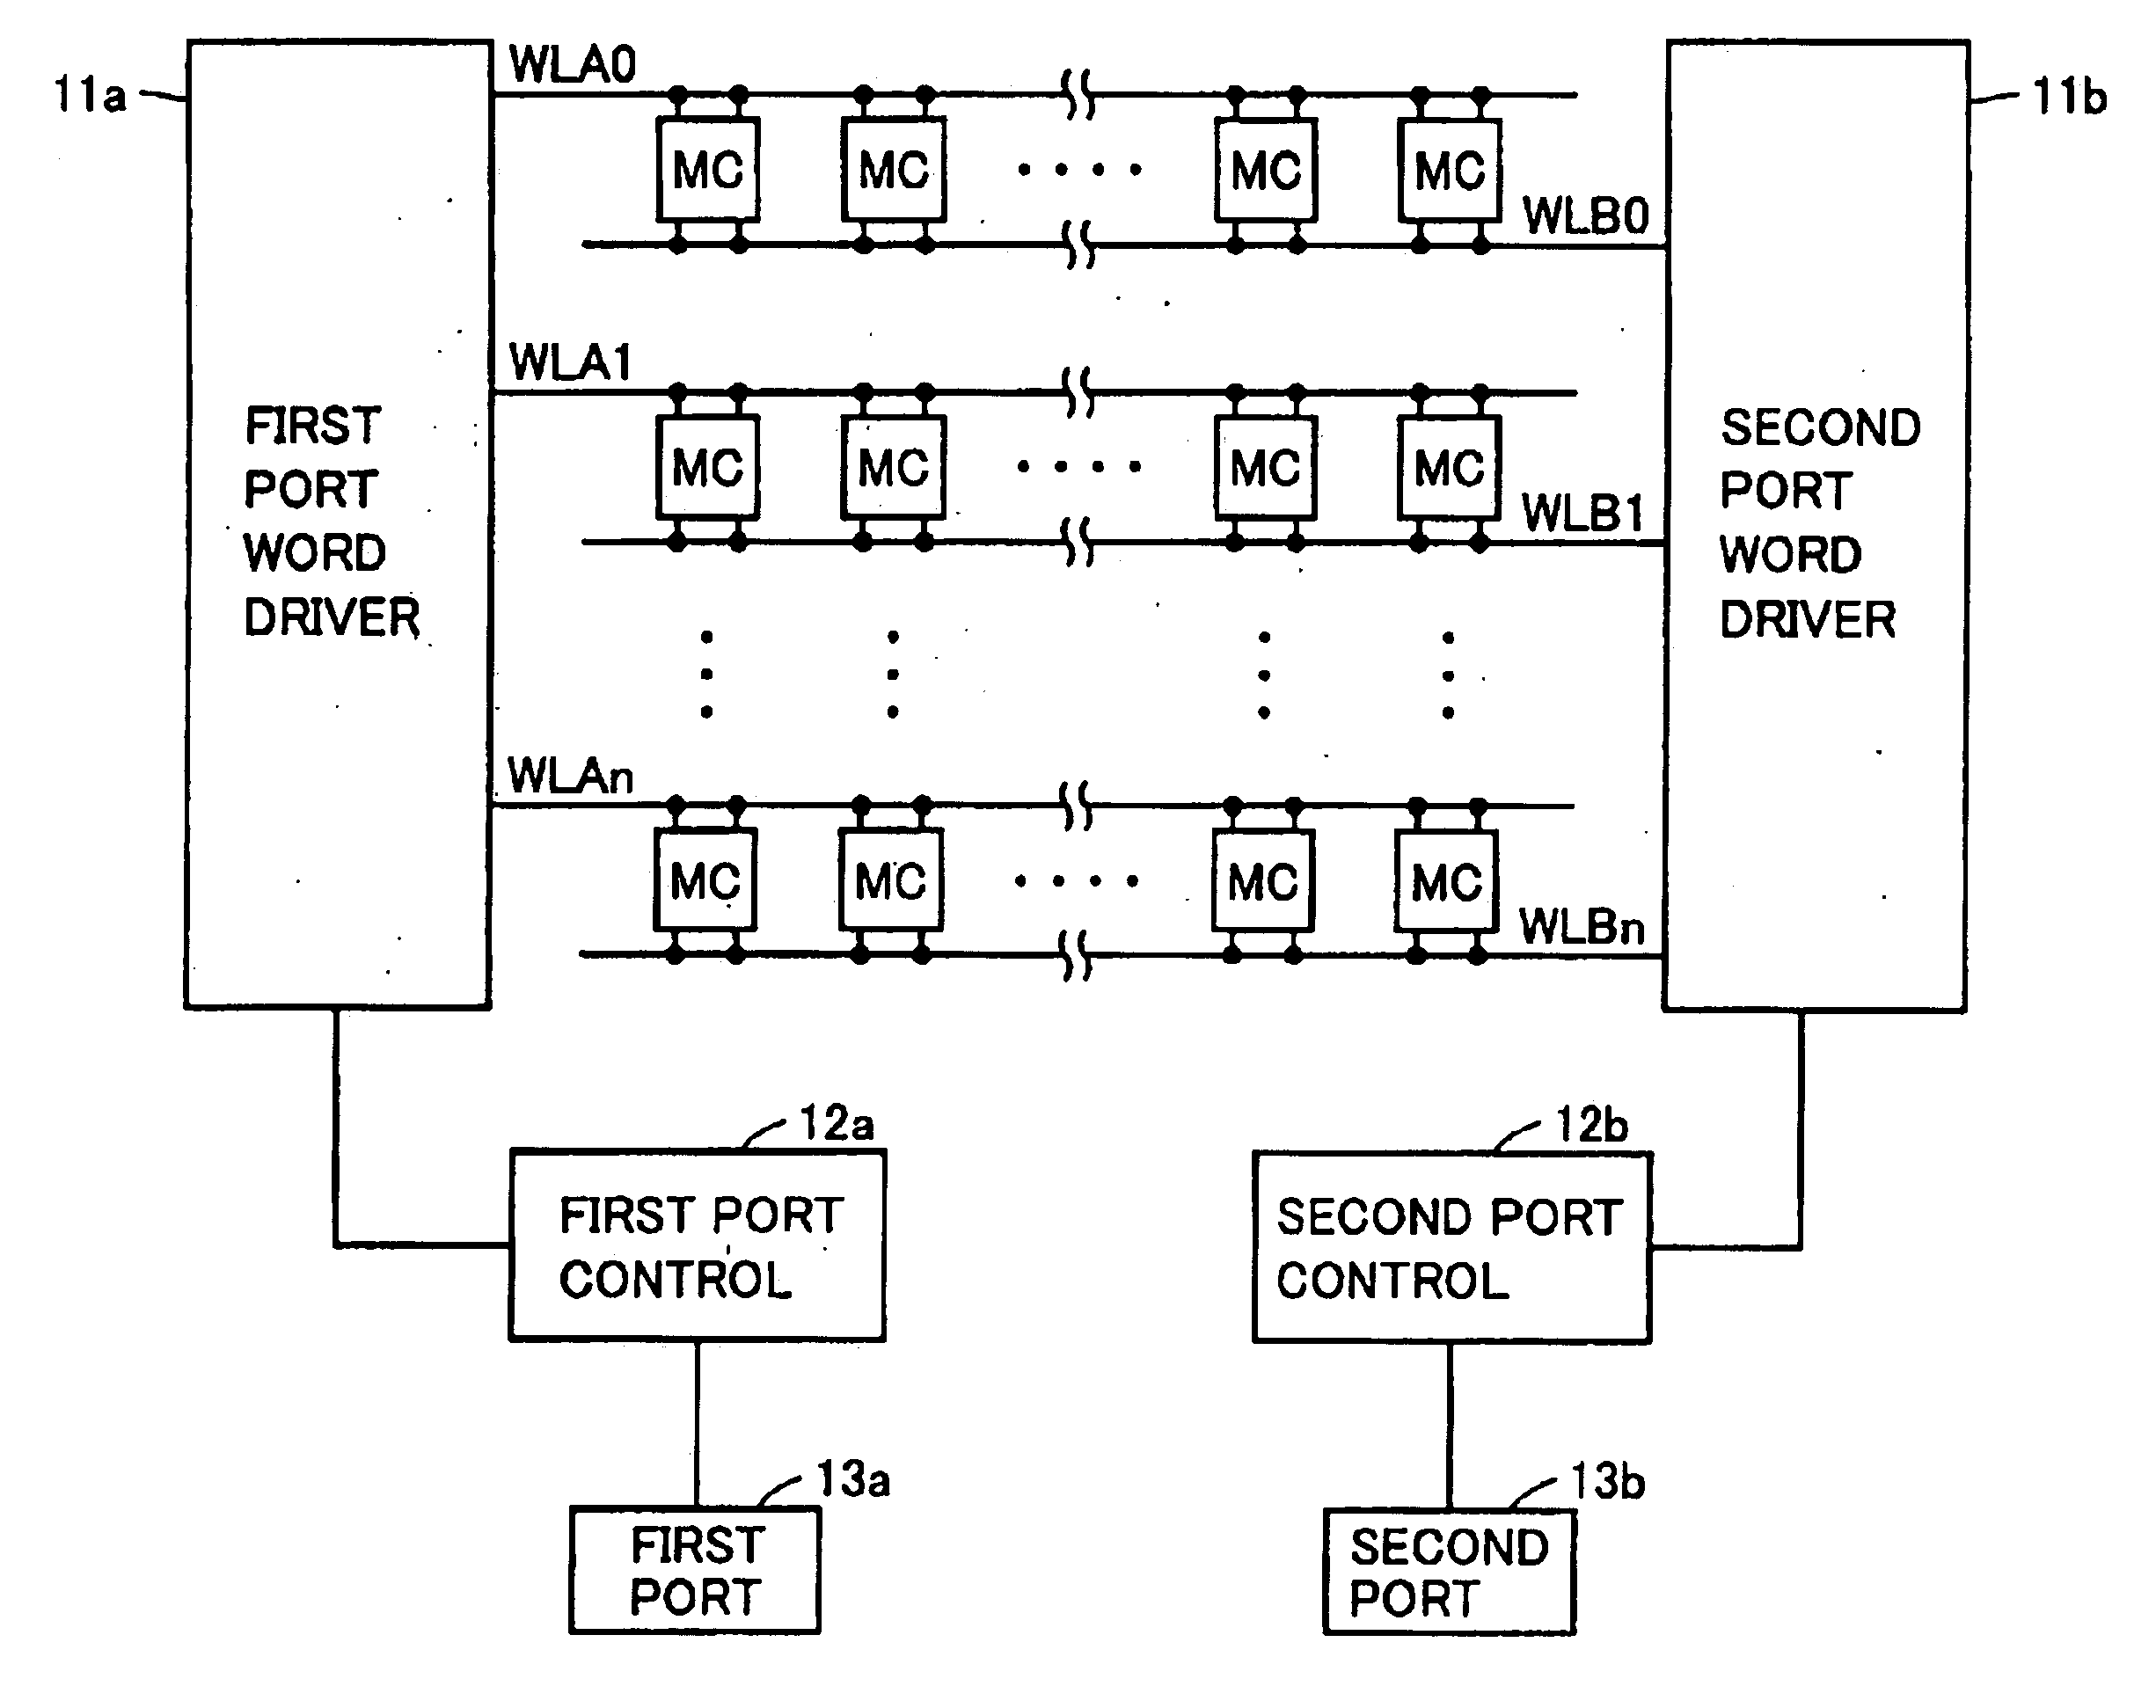 Reduction of capacitive effects in a semiconductor memory device